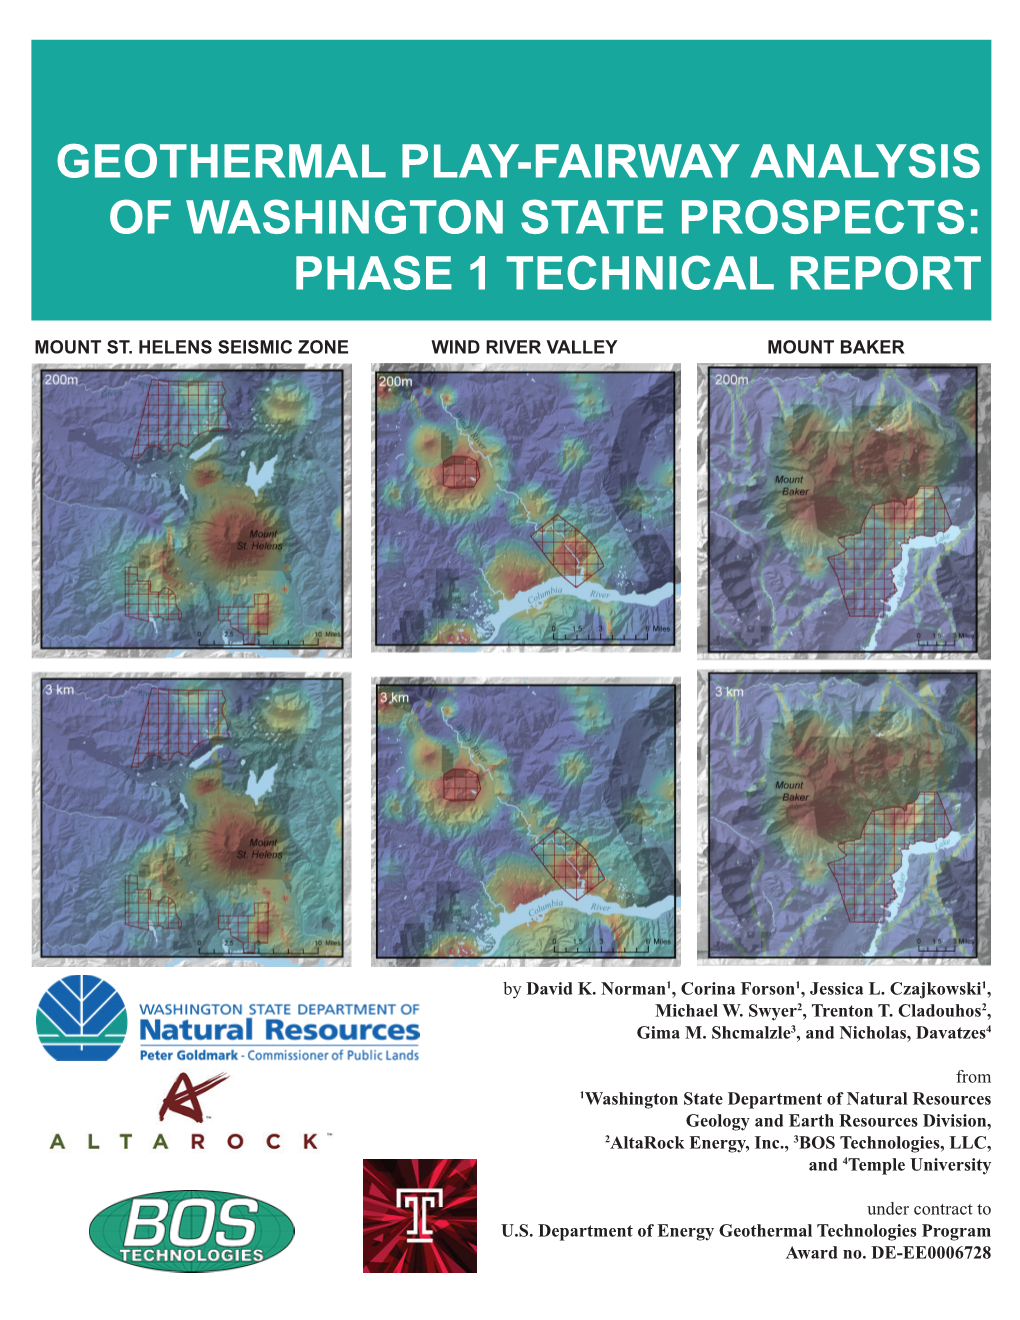 Geothermal Play-Fairway Analysis of Washington State Prospects: Phase 1 Technical Report